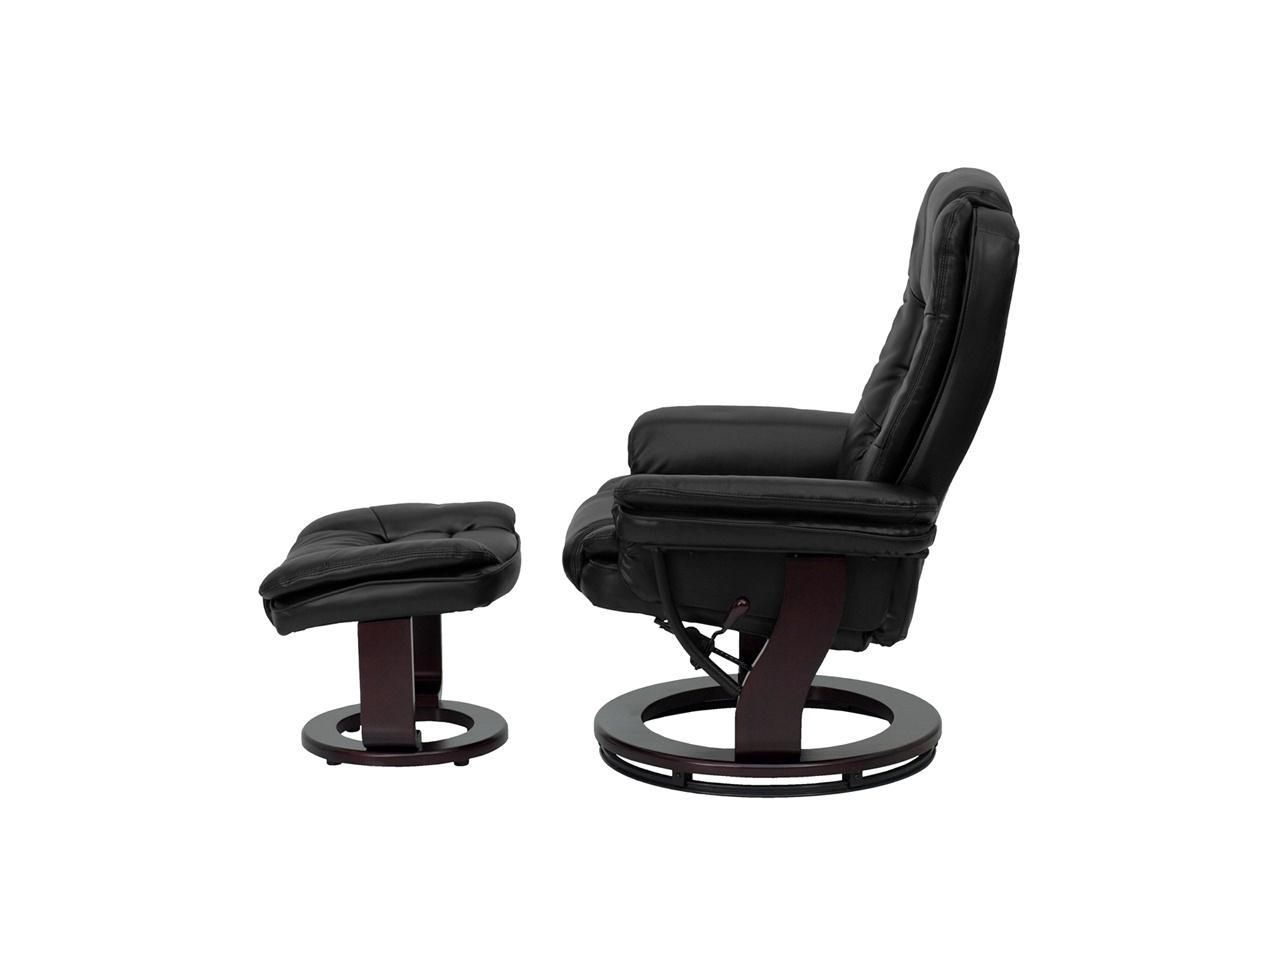 Contemporary Multi Position Recliner With Horizontal Stitching And Within 2019 Onyx Black Modern Swivel Ottomans (View 7 of 10)